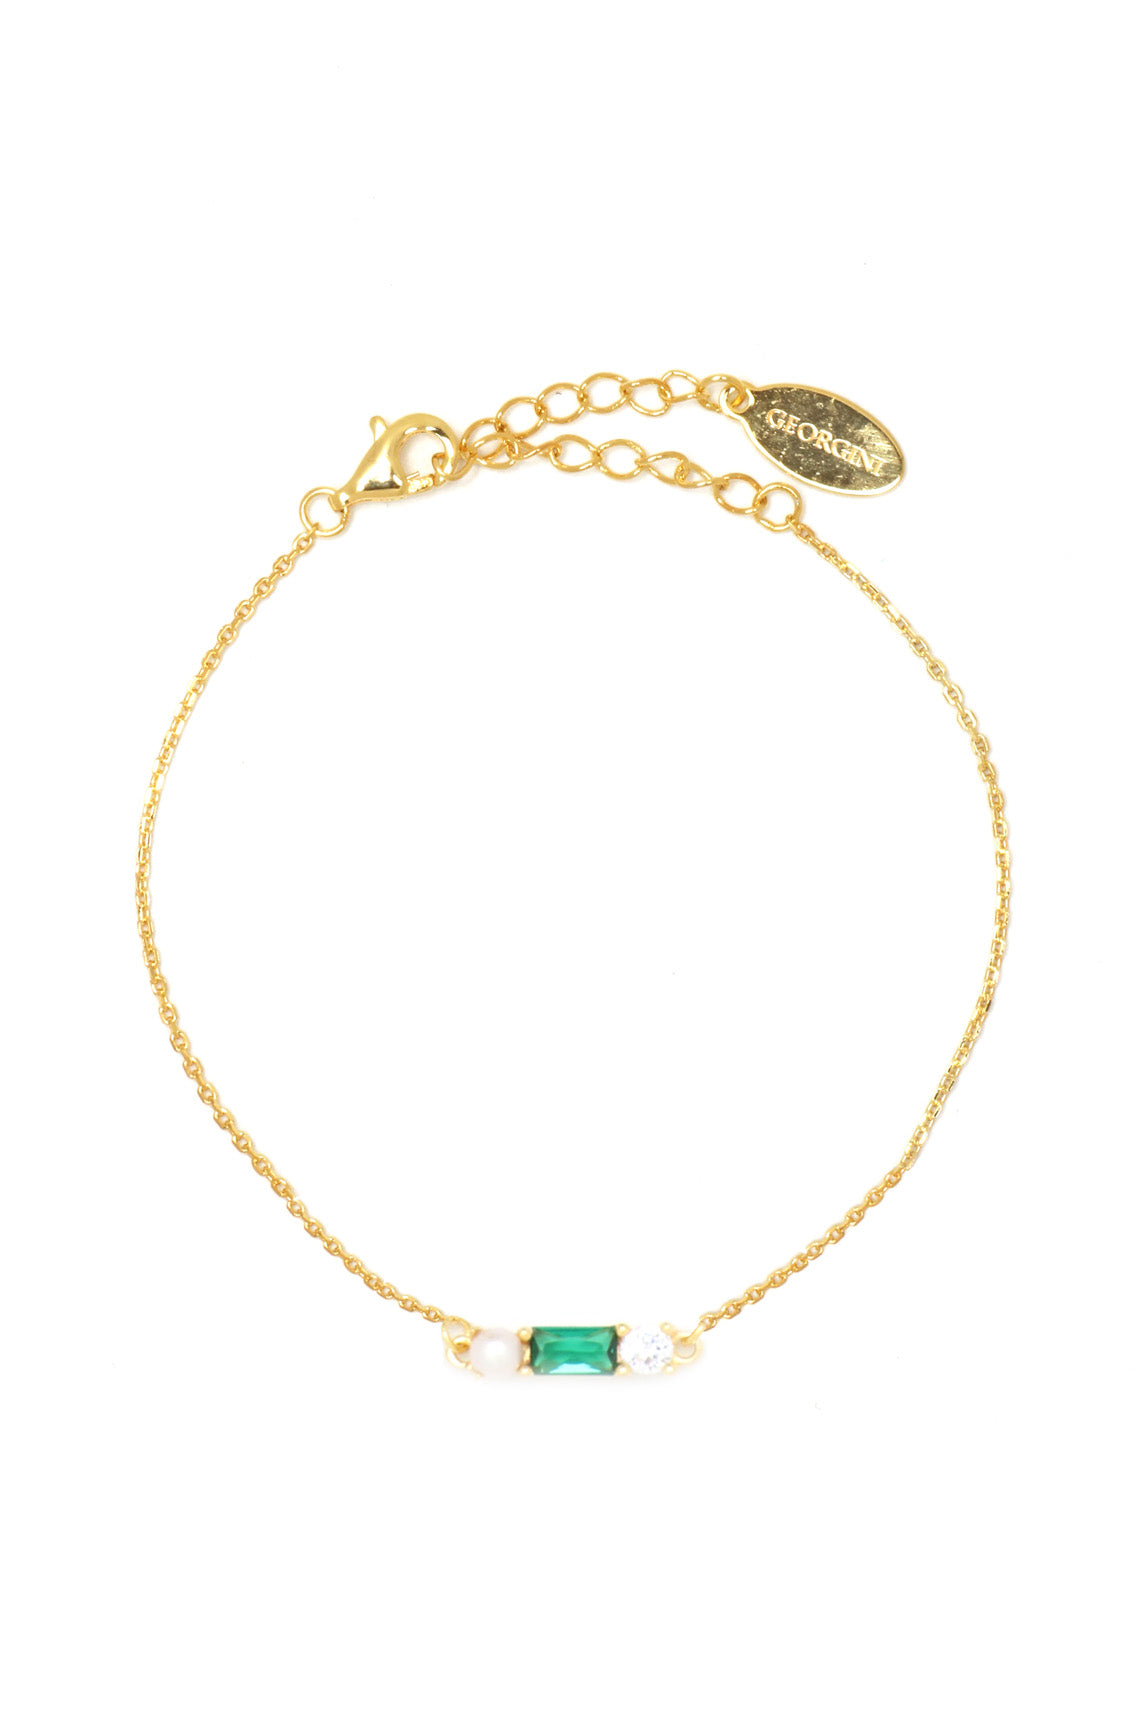 EMERALD ISLE FRESHWATER PEARL BRACELET IN EMERALD AND GOLD